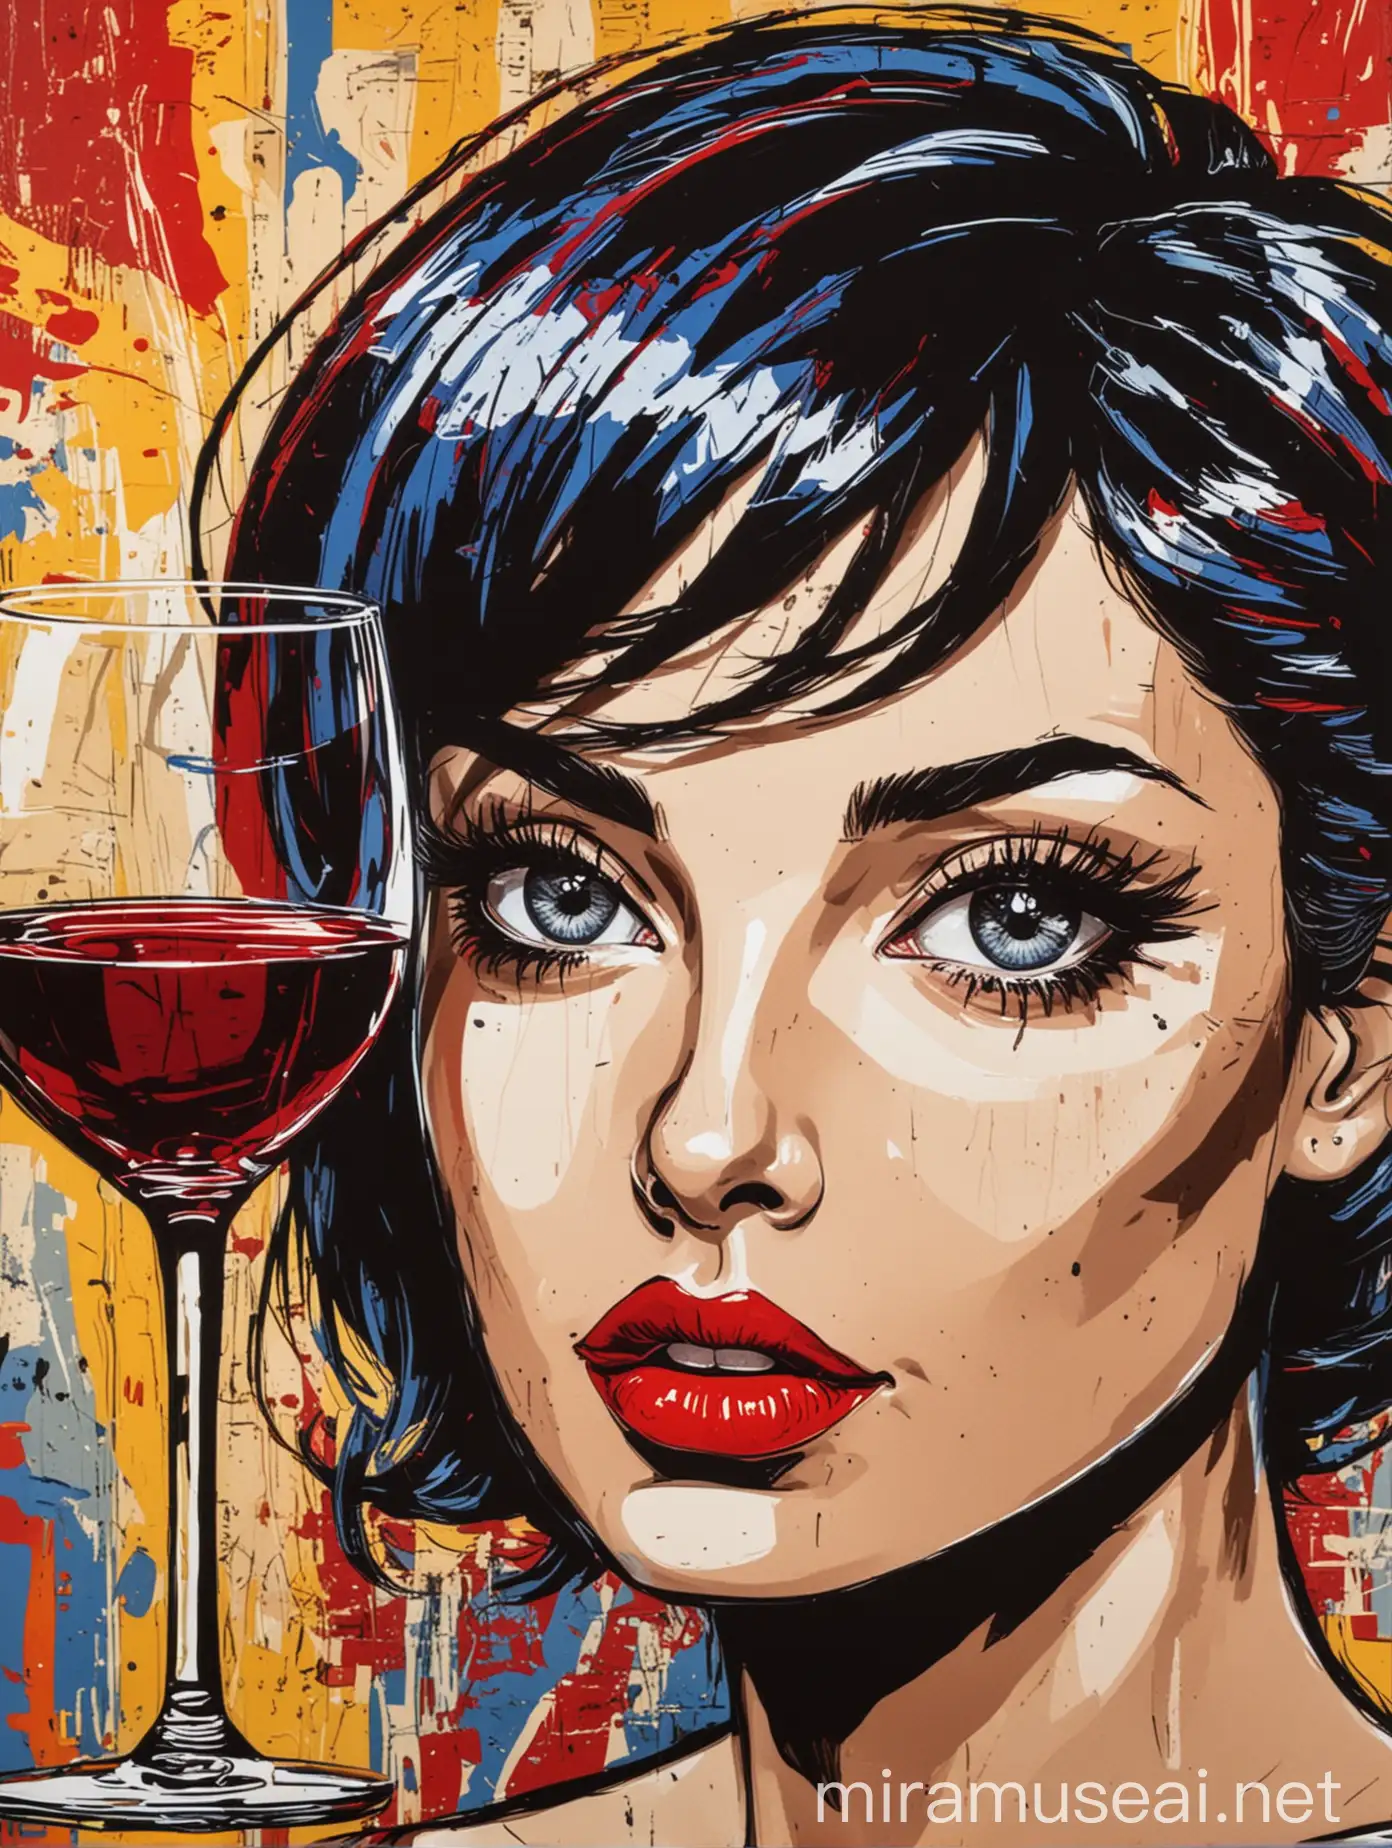 Woman with Short Dark Hair Holding Wine Glasses in Pop Art Style